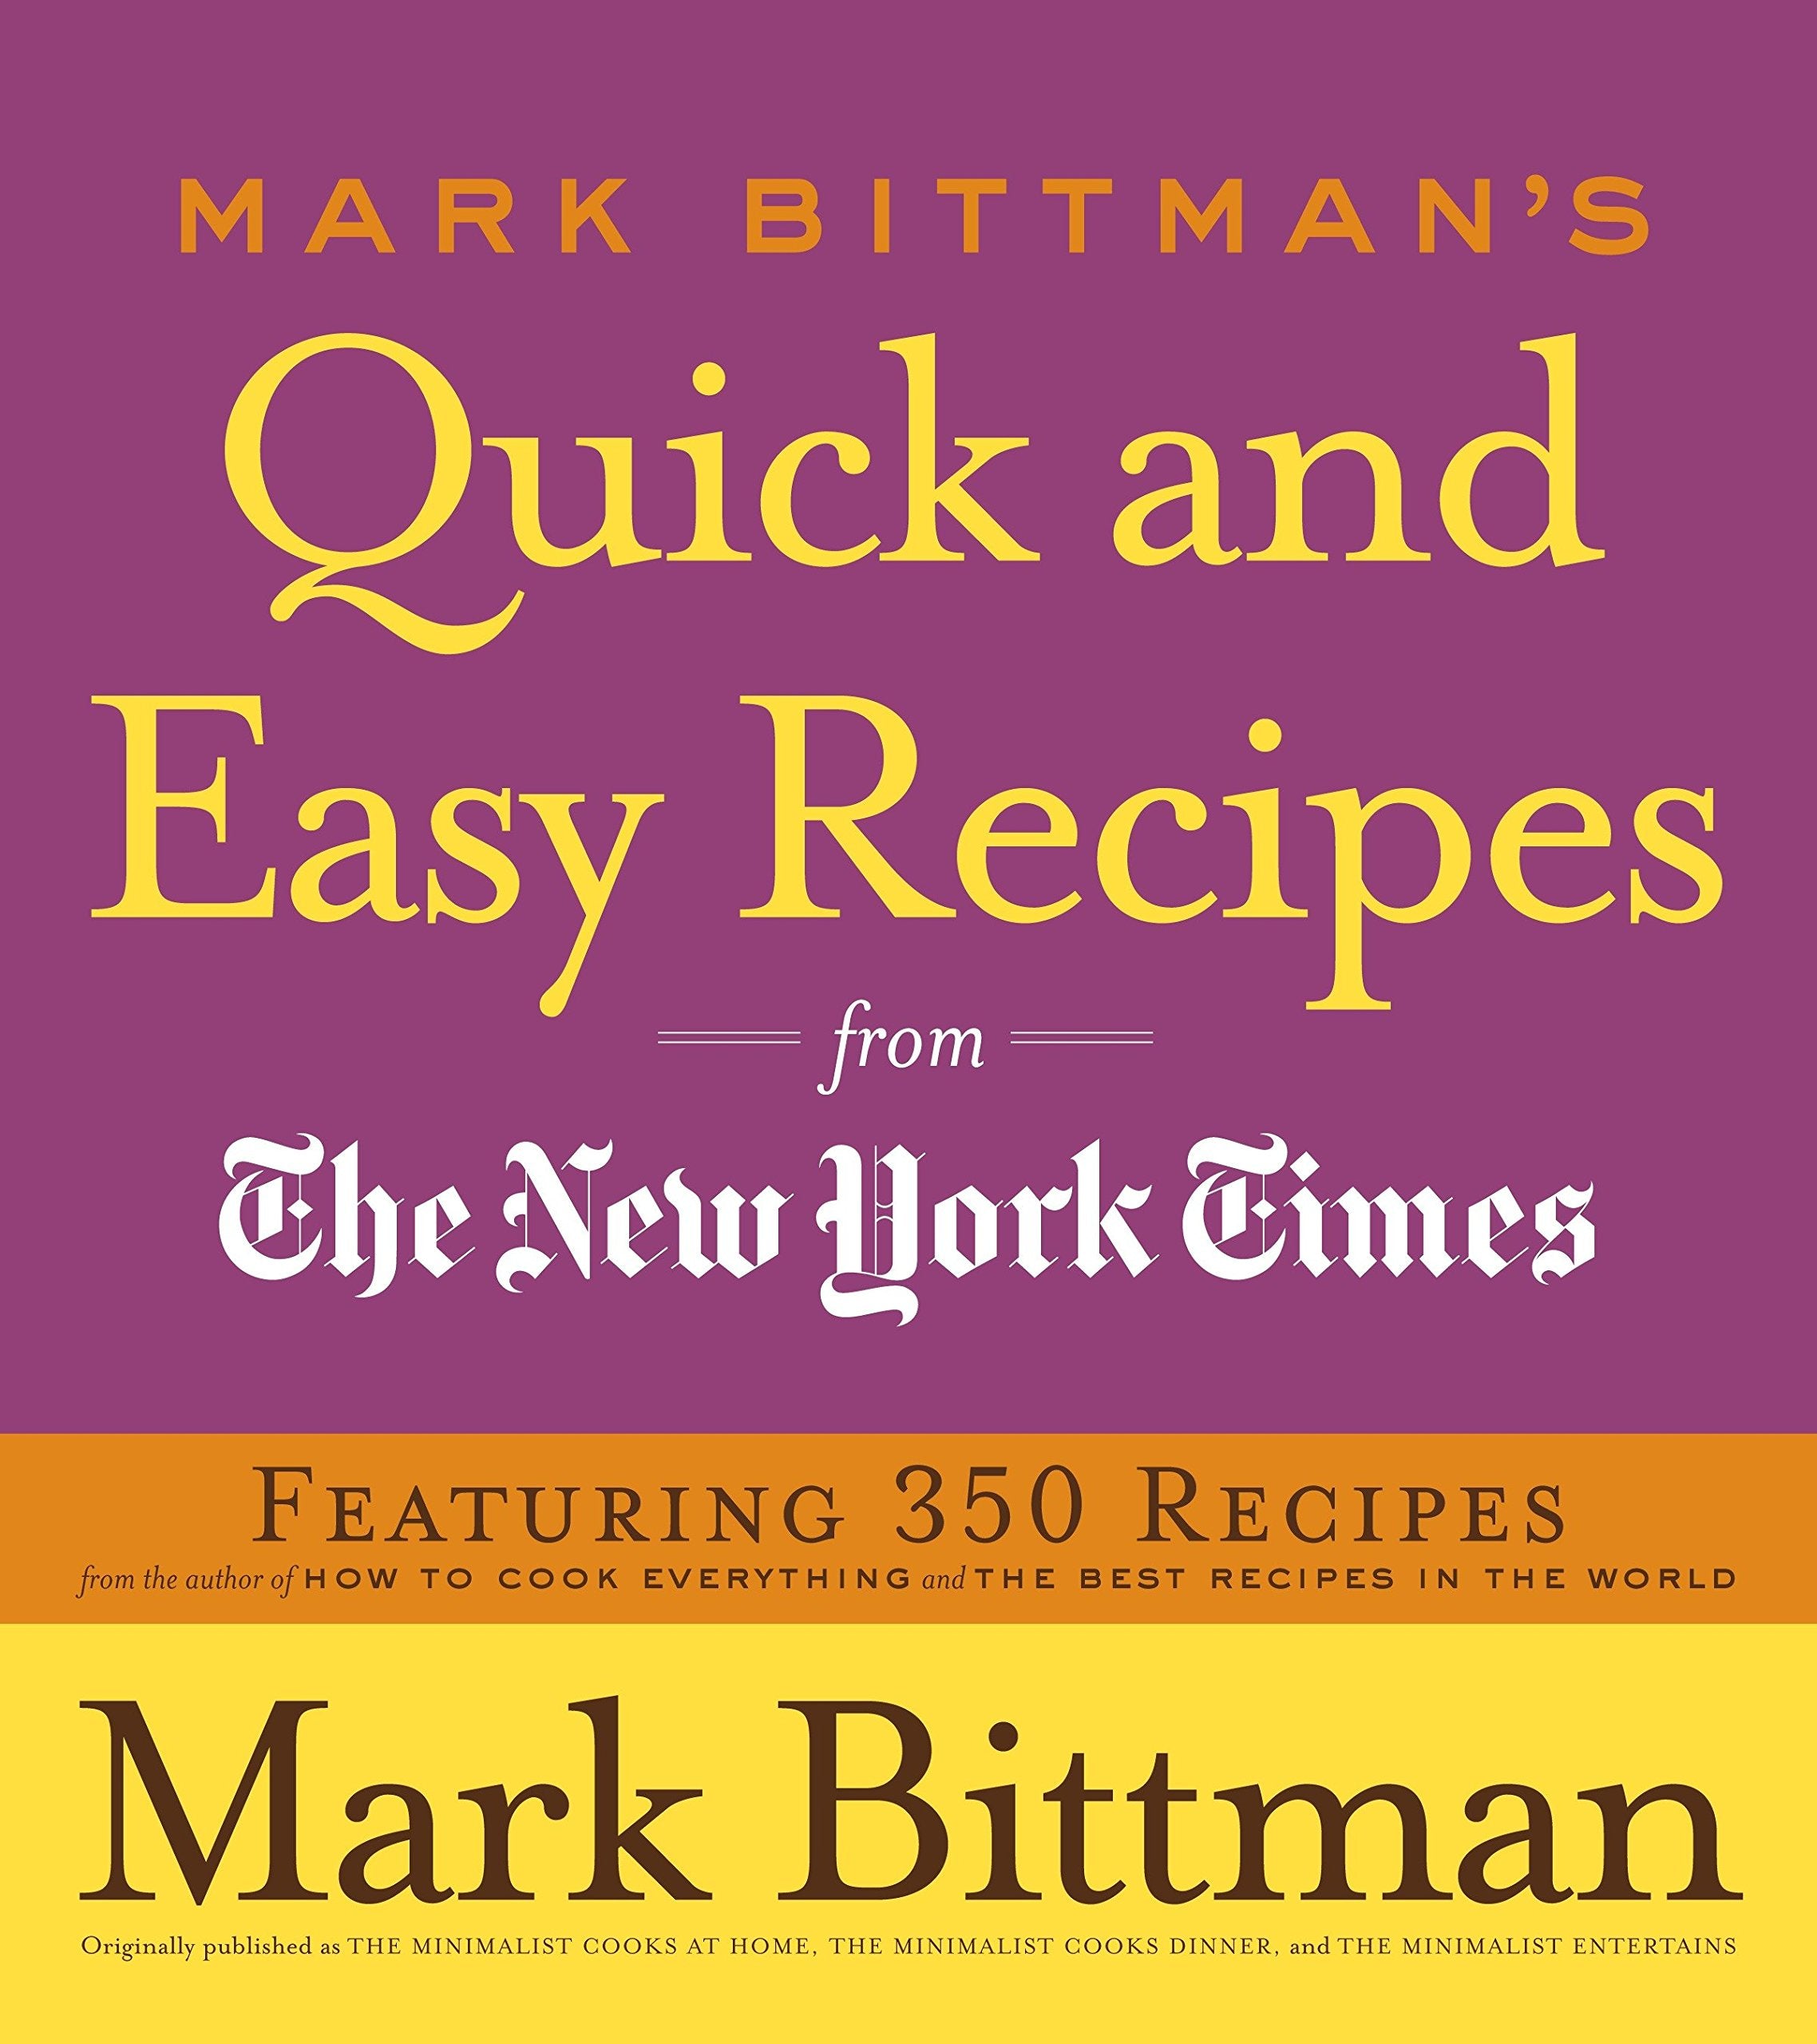 Mark Bittman's Quick and Easy Recipes from the New York Times: Featuring 350 Recipes from the Author of HOW TO COOK EVERYTHING and THE BEST RECIPES IN THE WORLD: A Cookbook - Mark Bittman